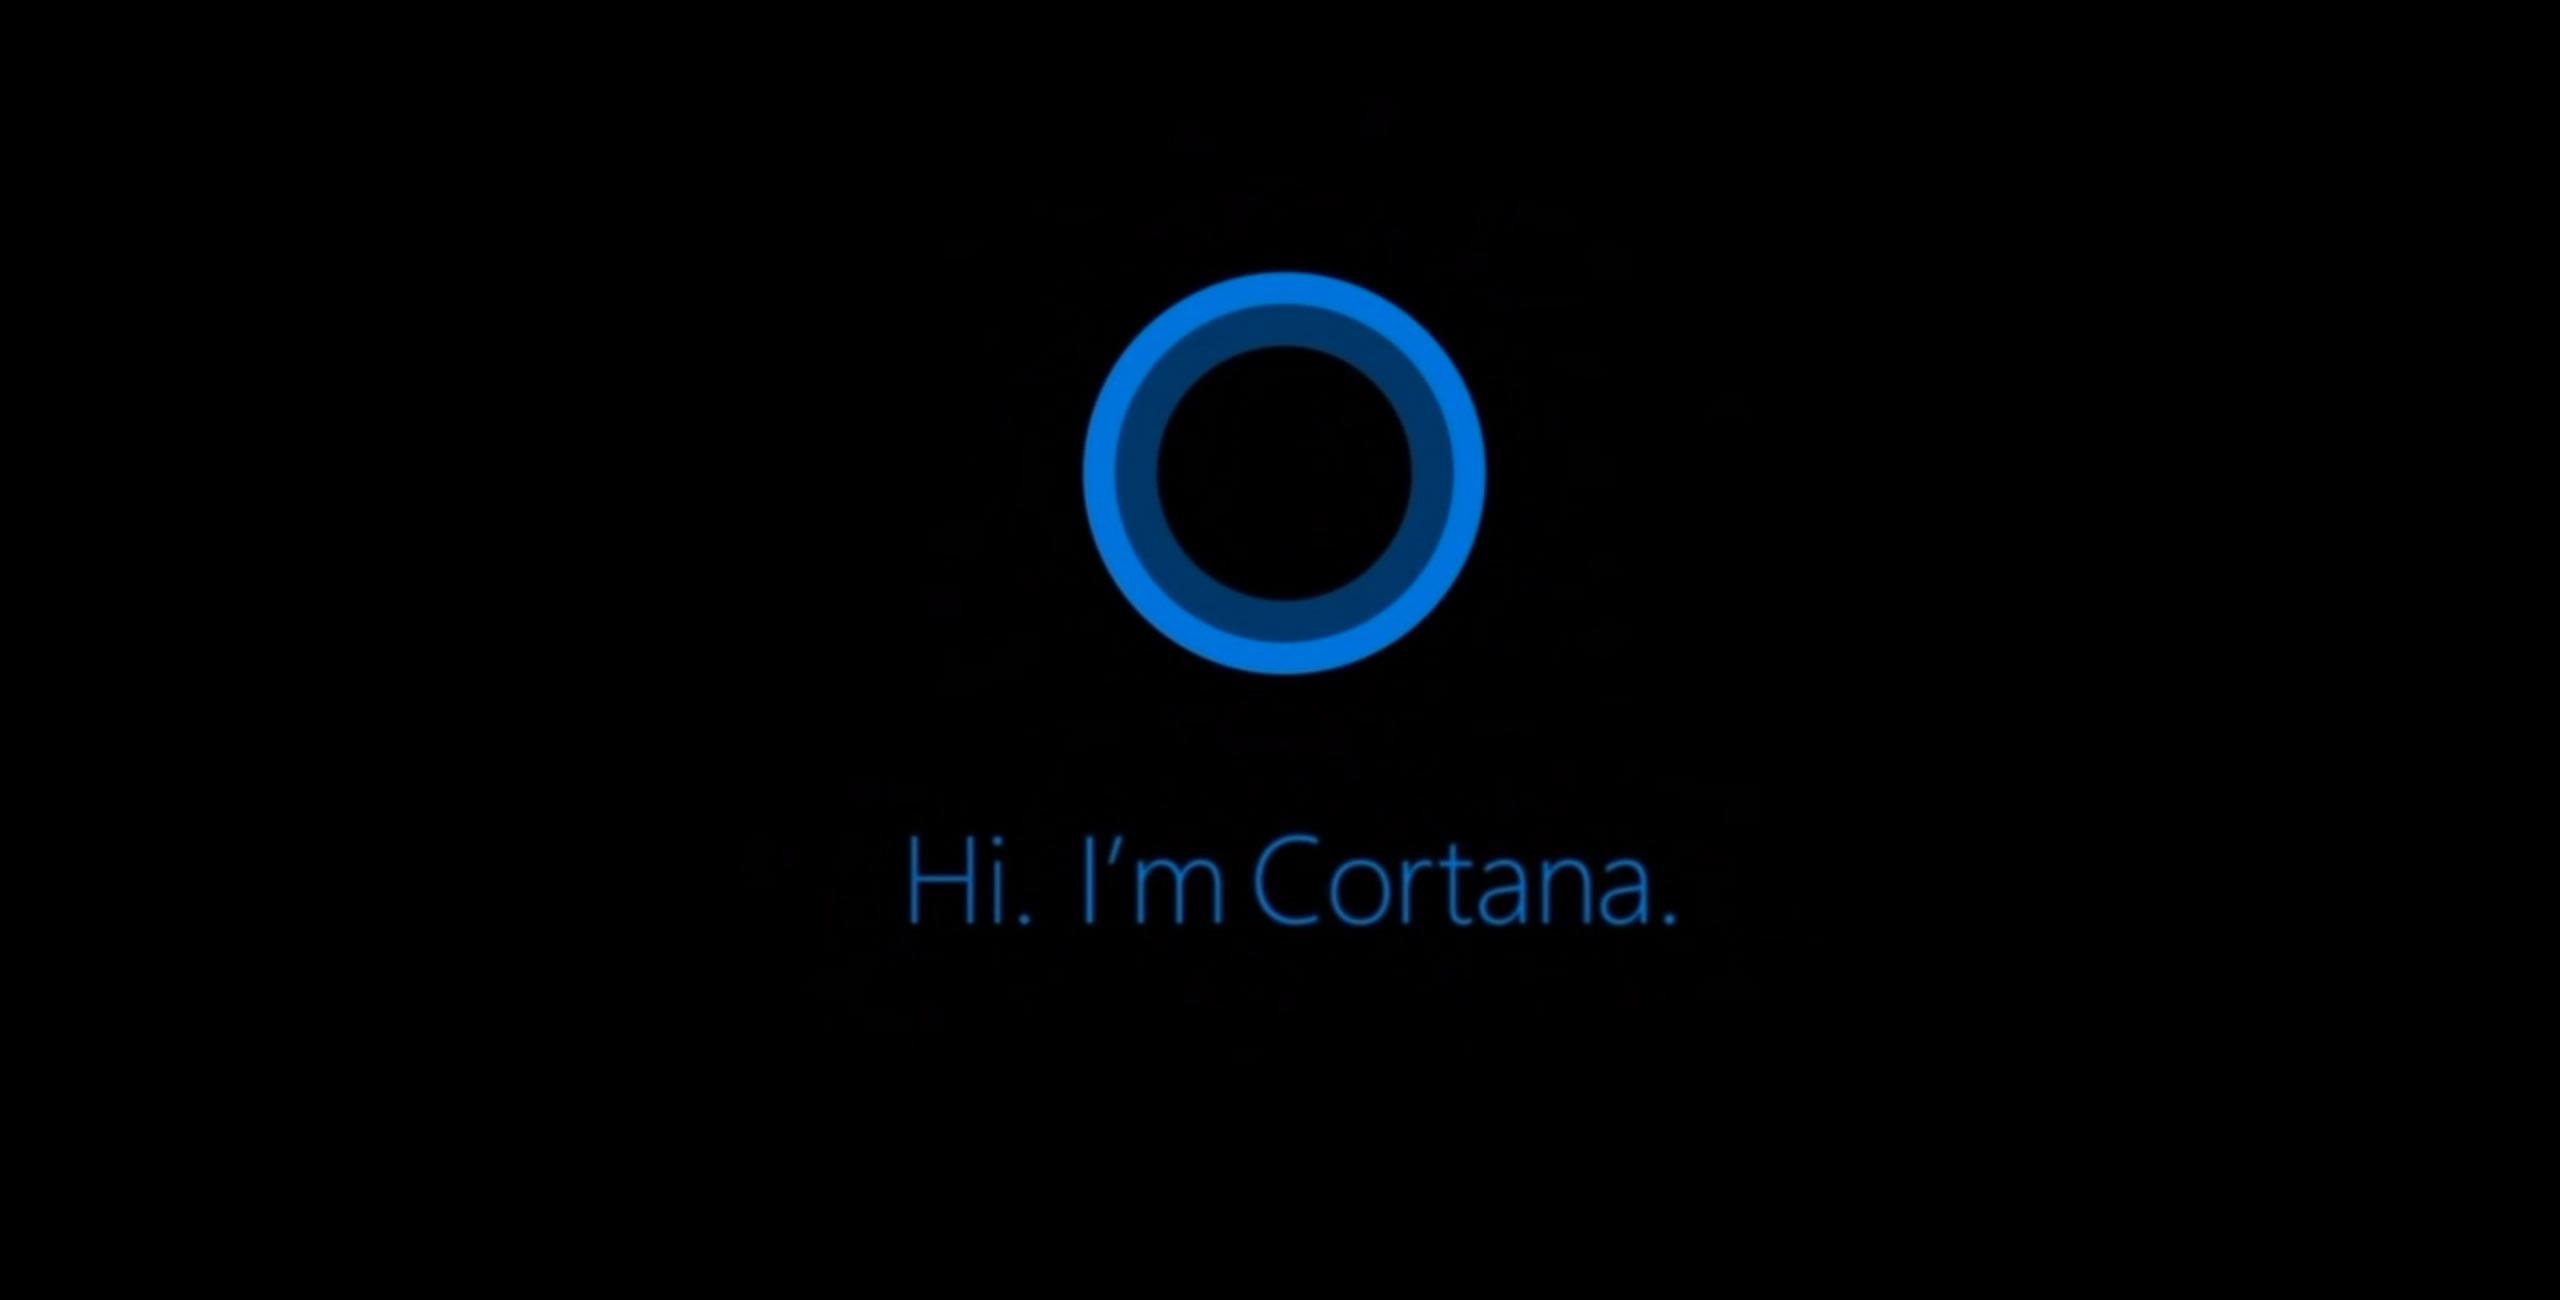 Whats new in the Windows Phone 8.1 Update? – Cortana, Live Tiles and Action Centre